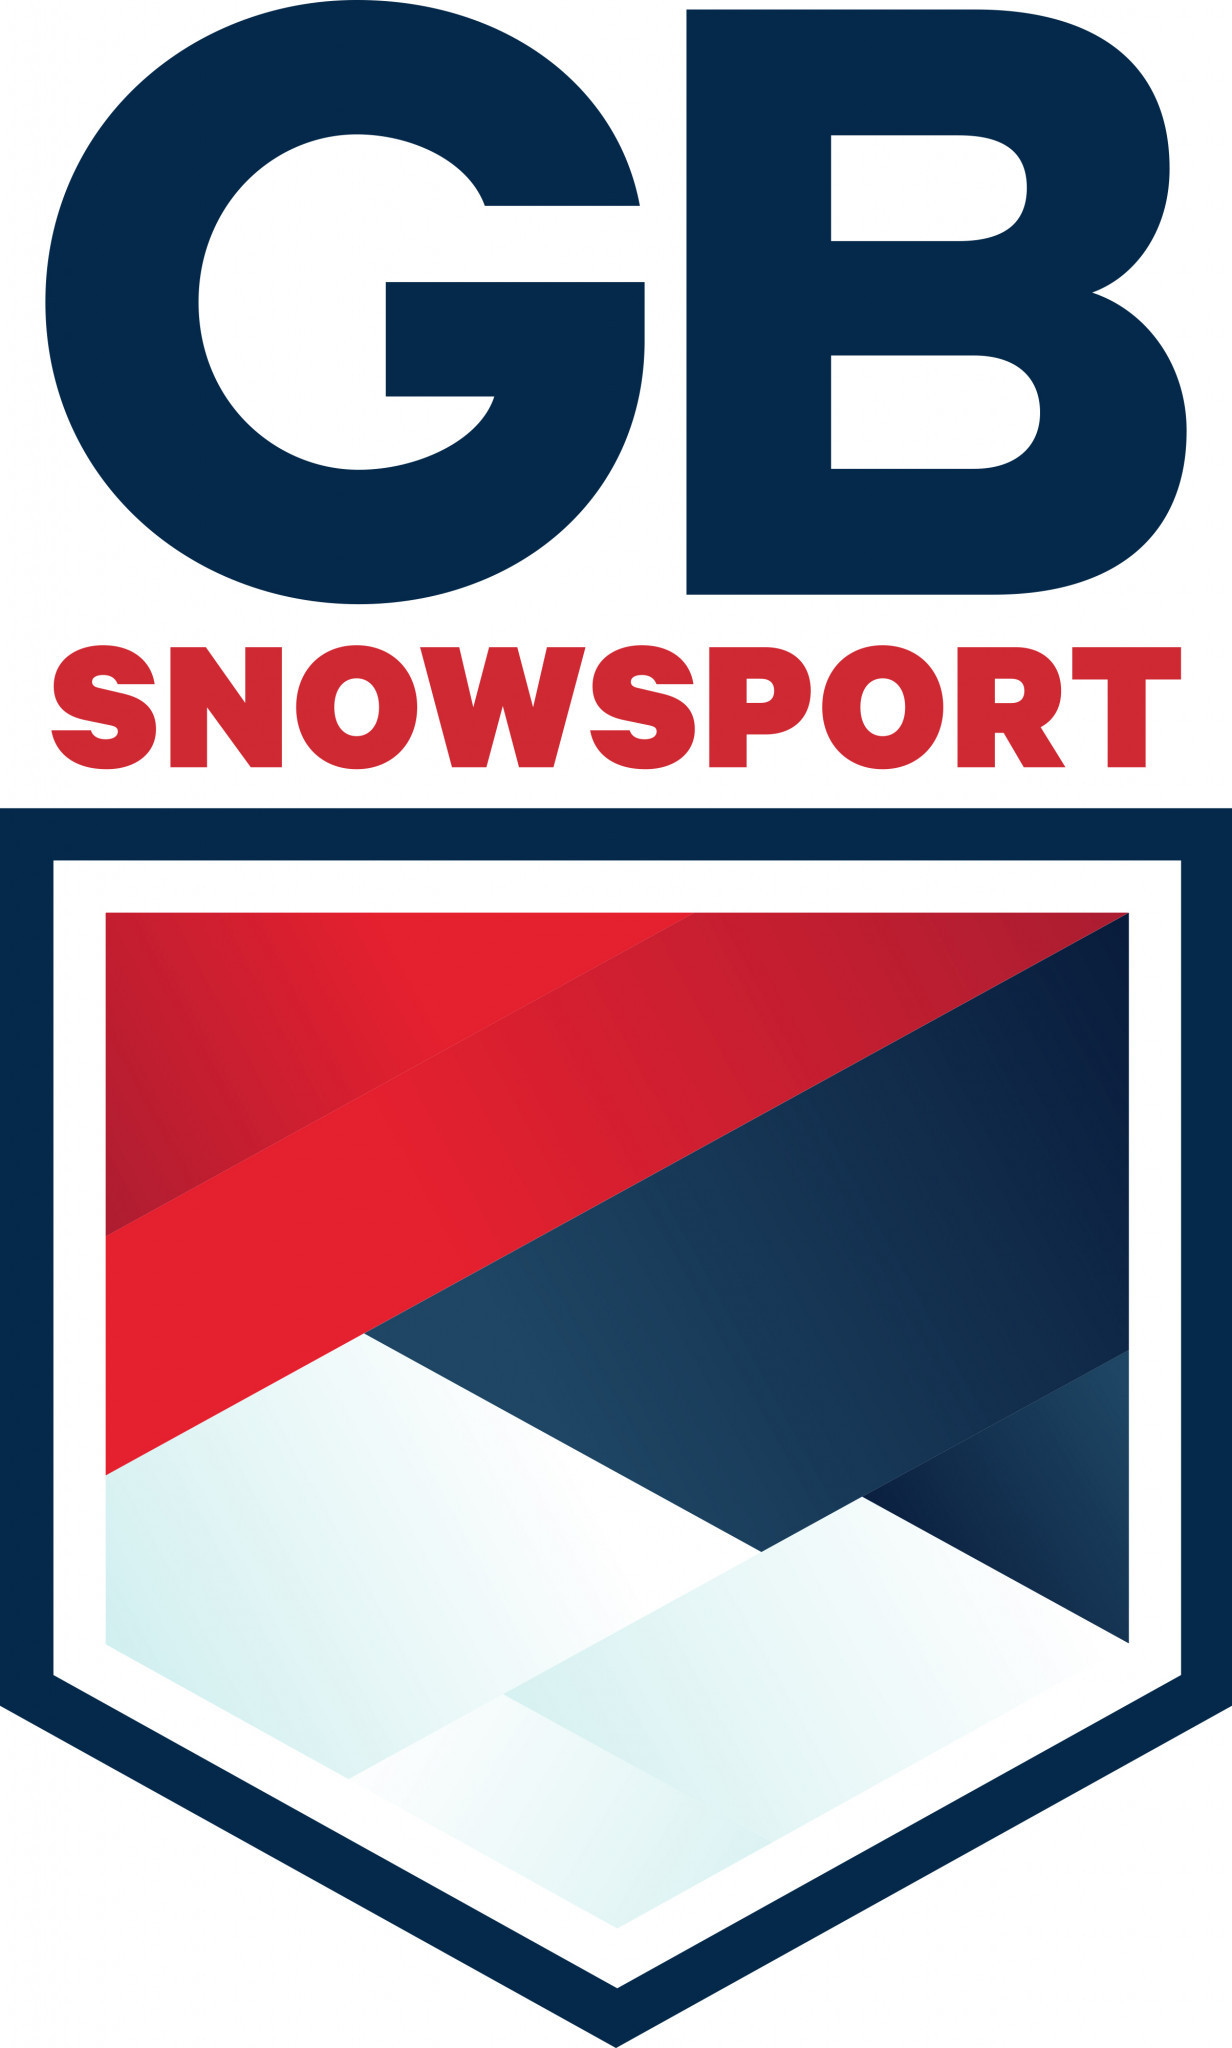 As part of the rebranding, GB Snowsport has released a new logo, tagline and slogan ©GB Snowsport